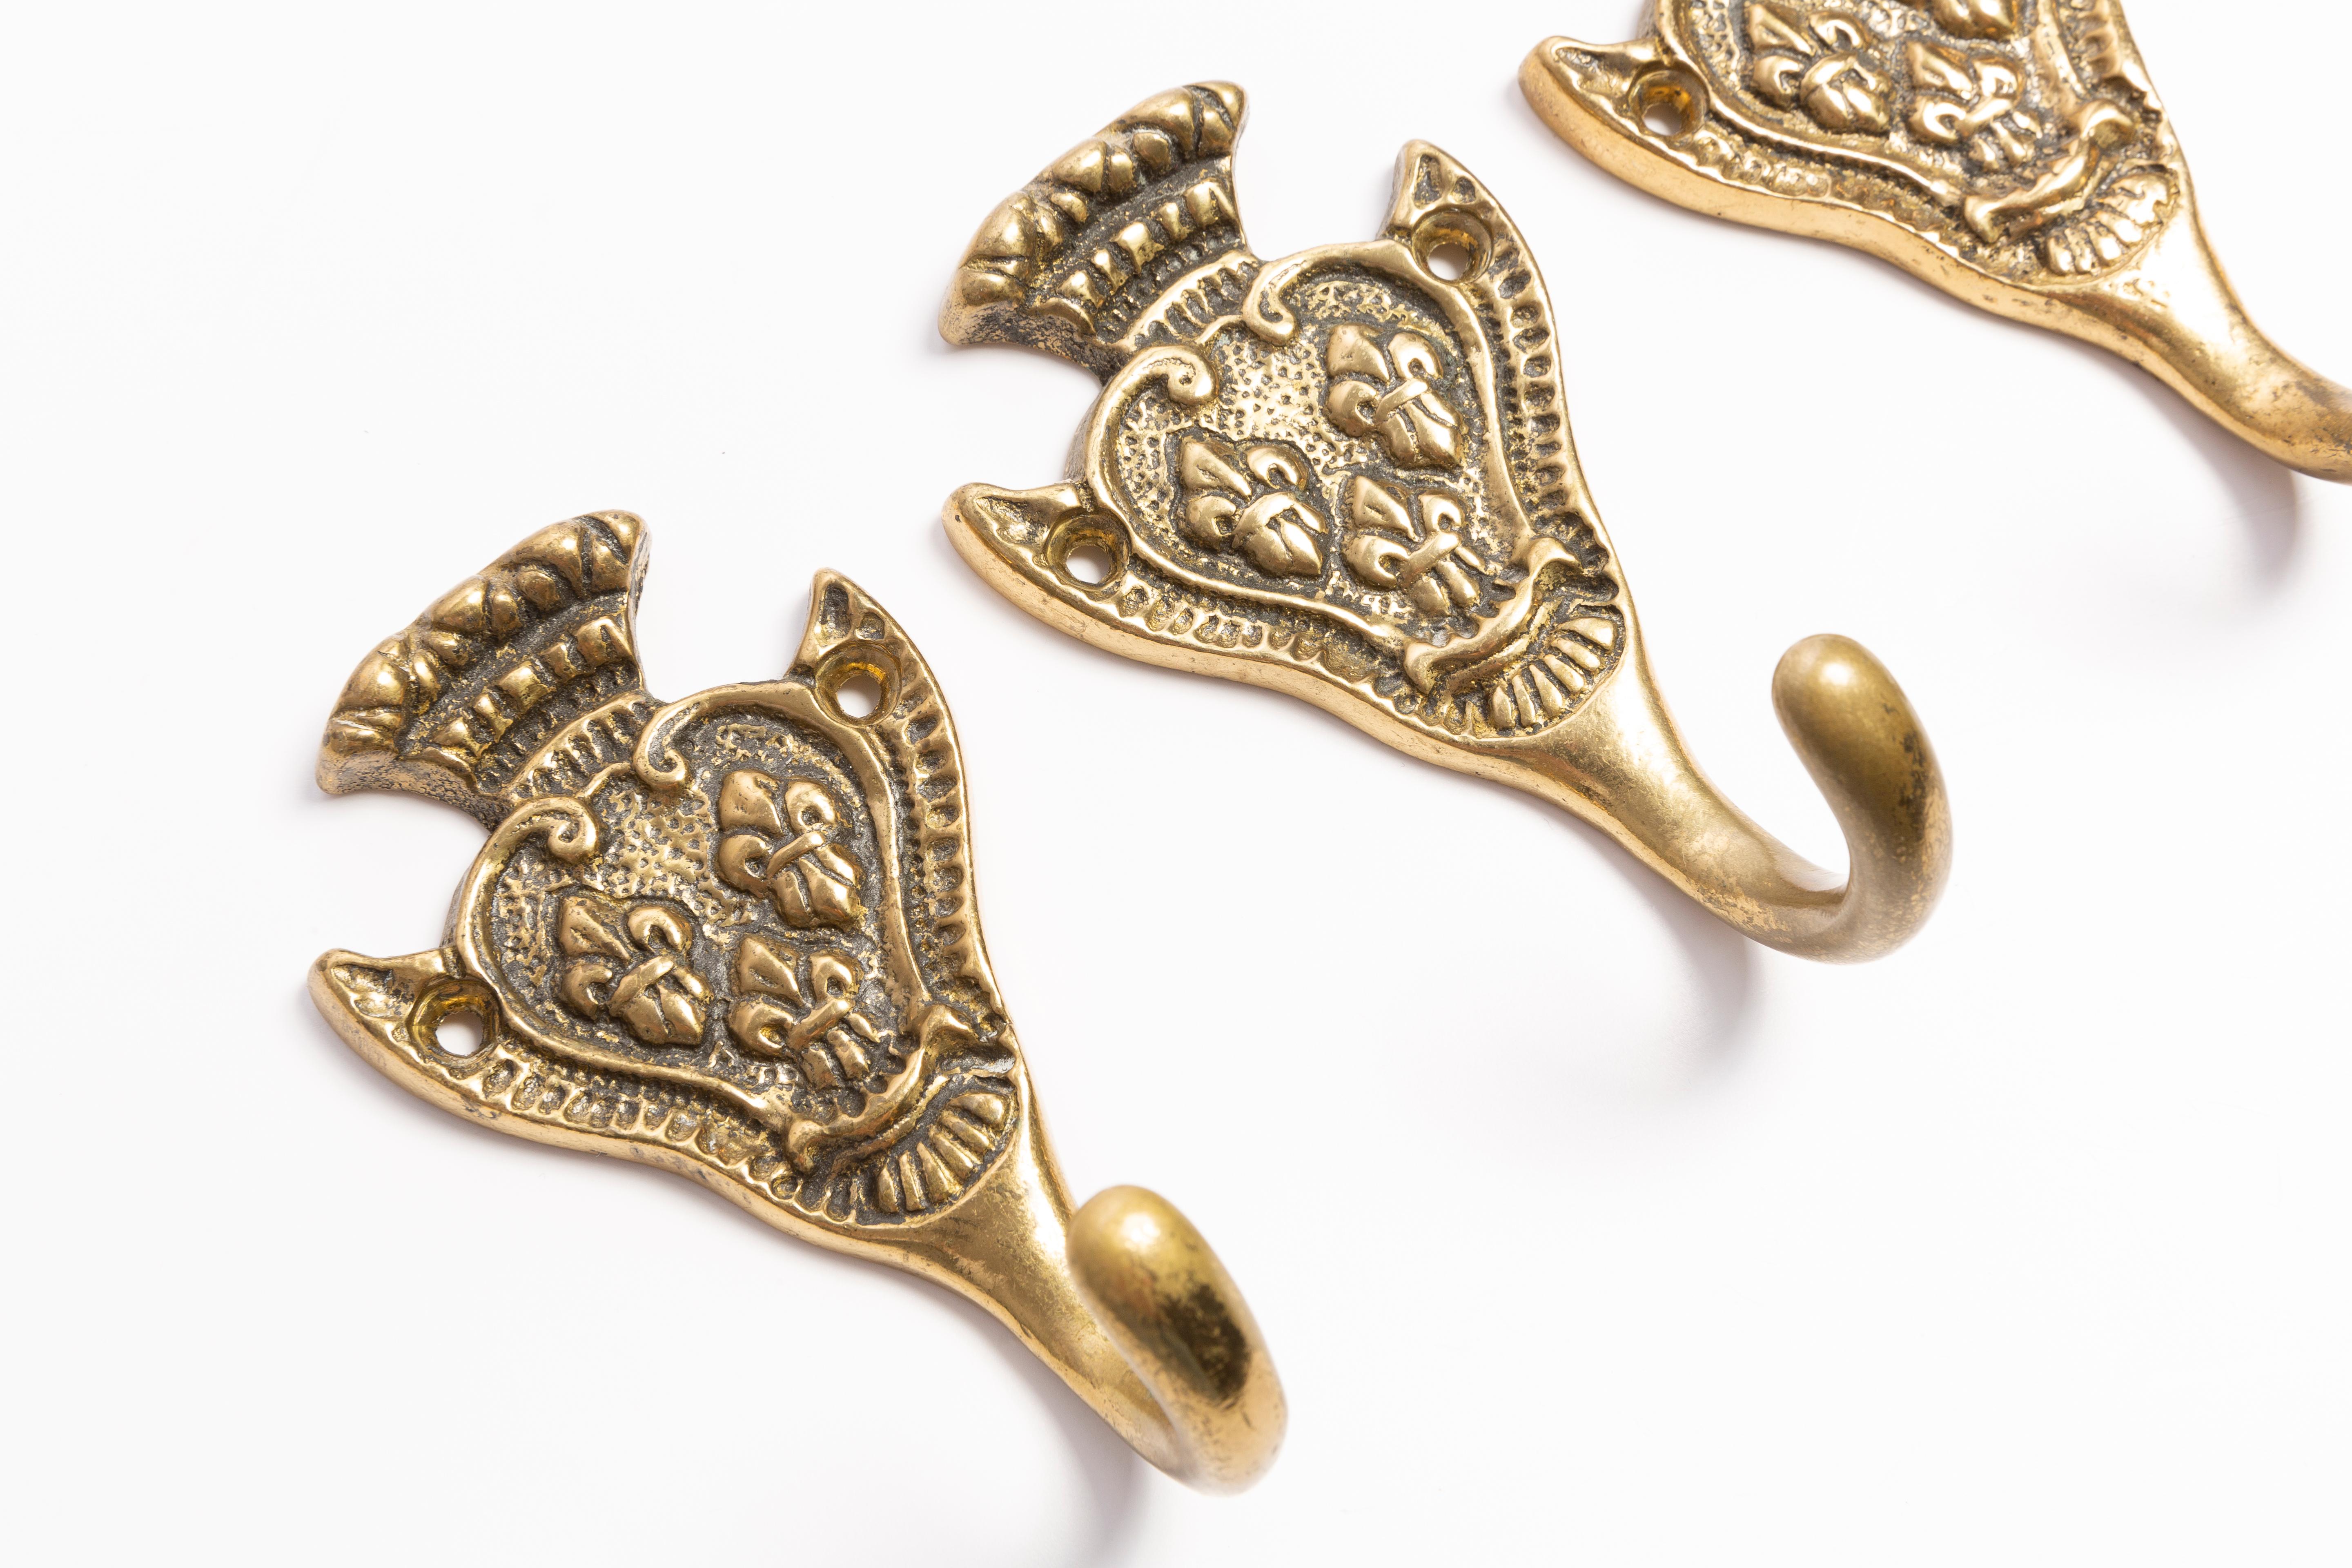 Italian Set of Four Vintage Gold Decorative Wall Hangers, Europe, 1960s For Sale